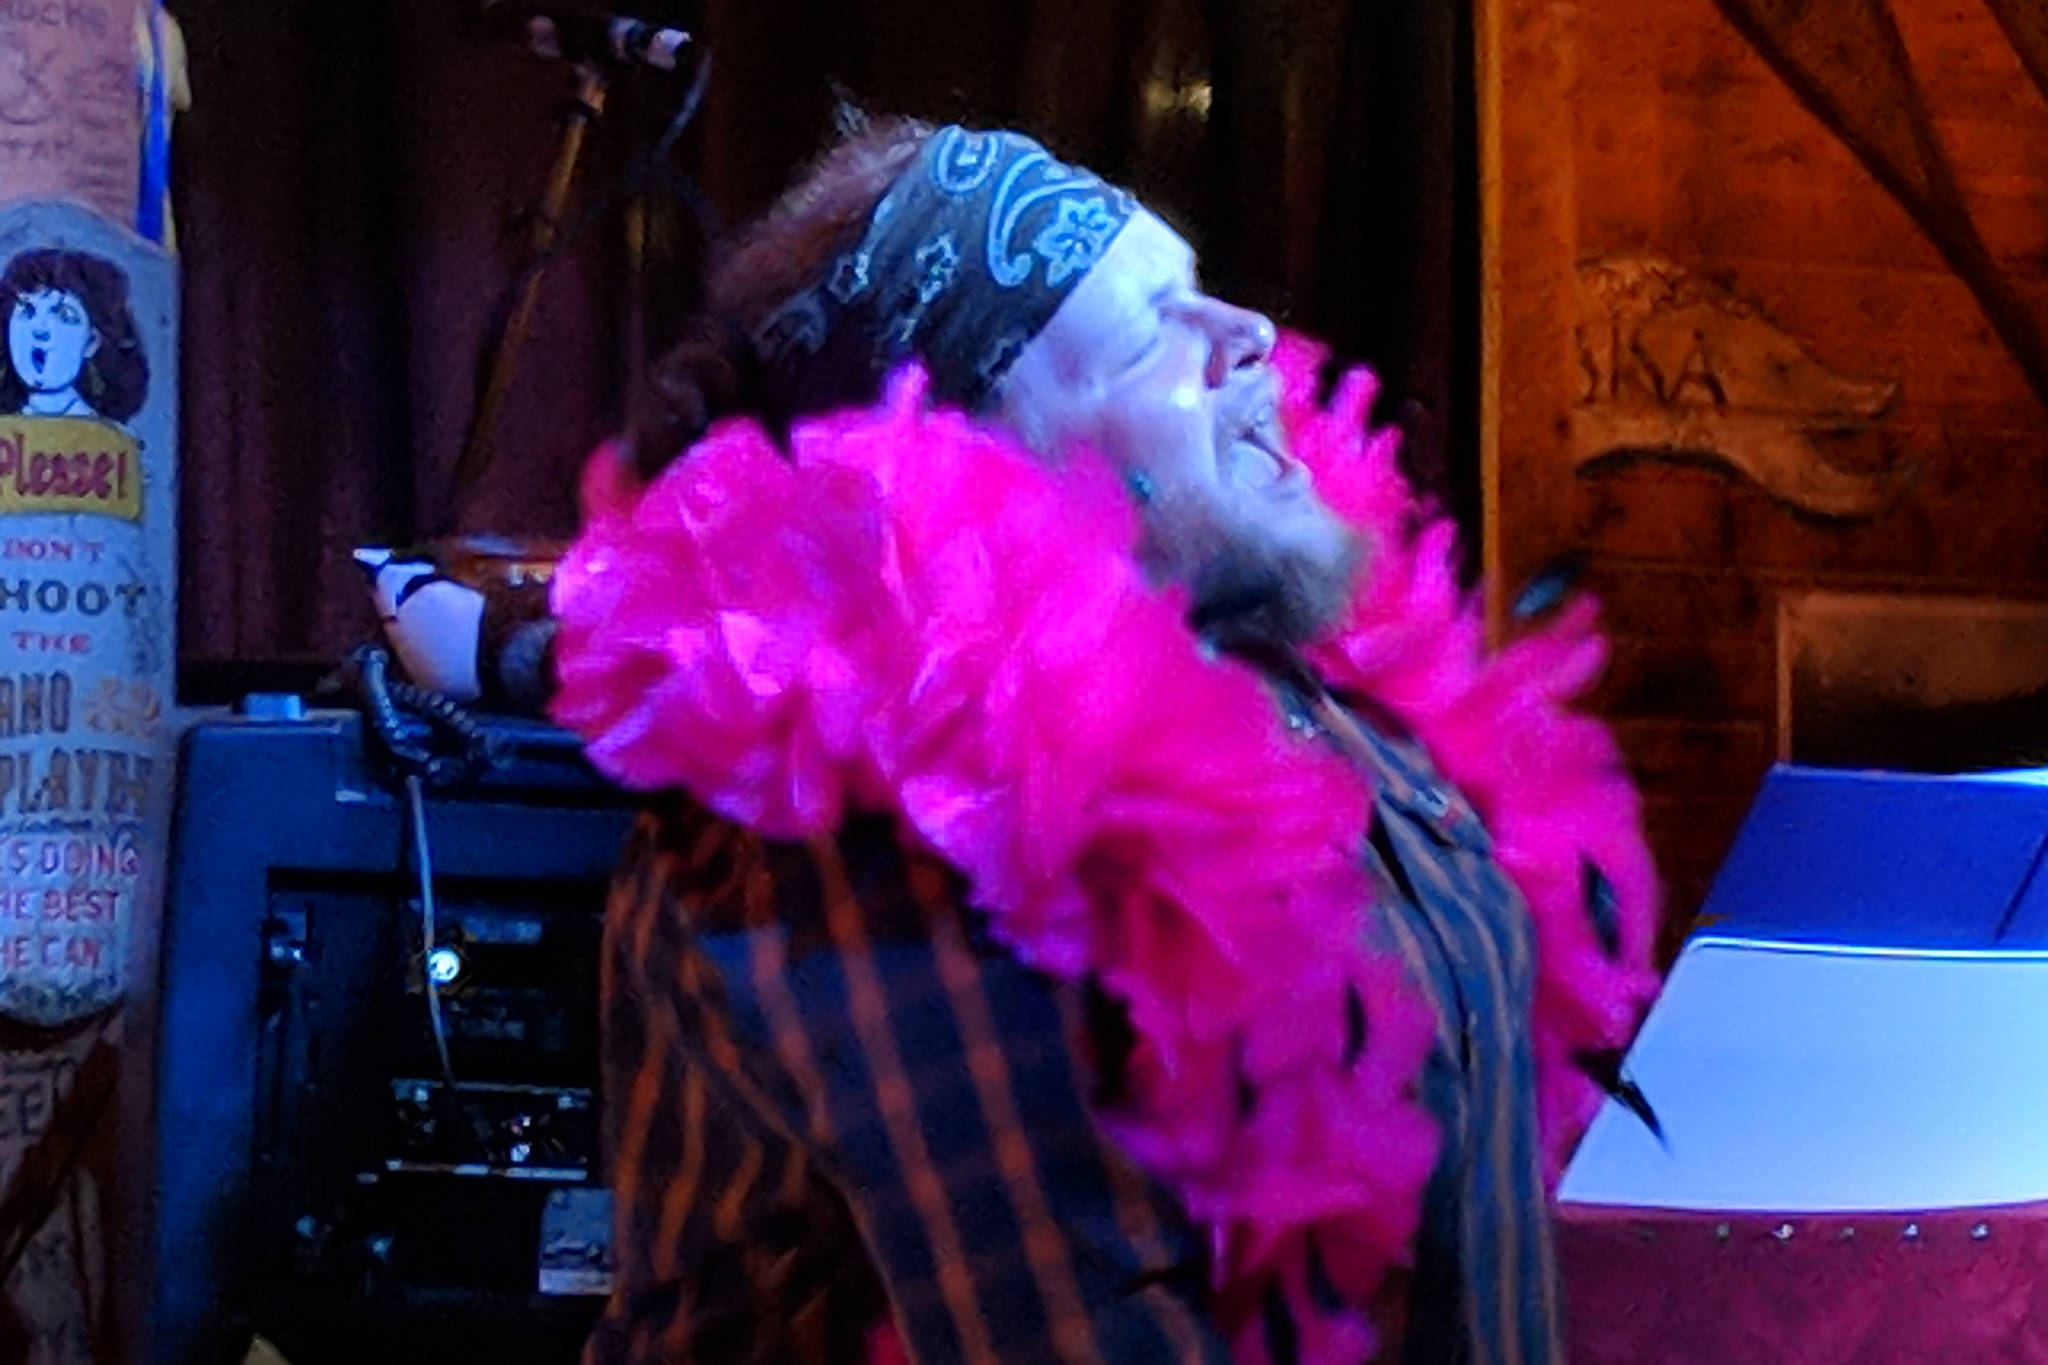 Men took the stage too for the Nude & Rude Revue “Try It; You’ll Like it” burlesque show. This performance which revealed real men wear corsets and pasties, was set to “What’s Up” by 4 Non Blondes (Ben Hohenstatt | Capital City Weekly)